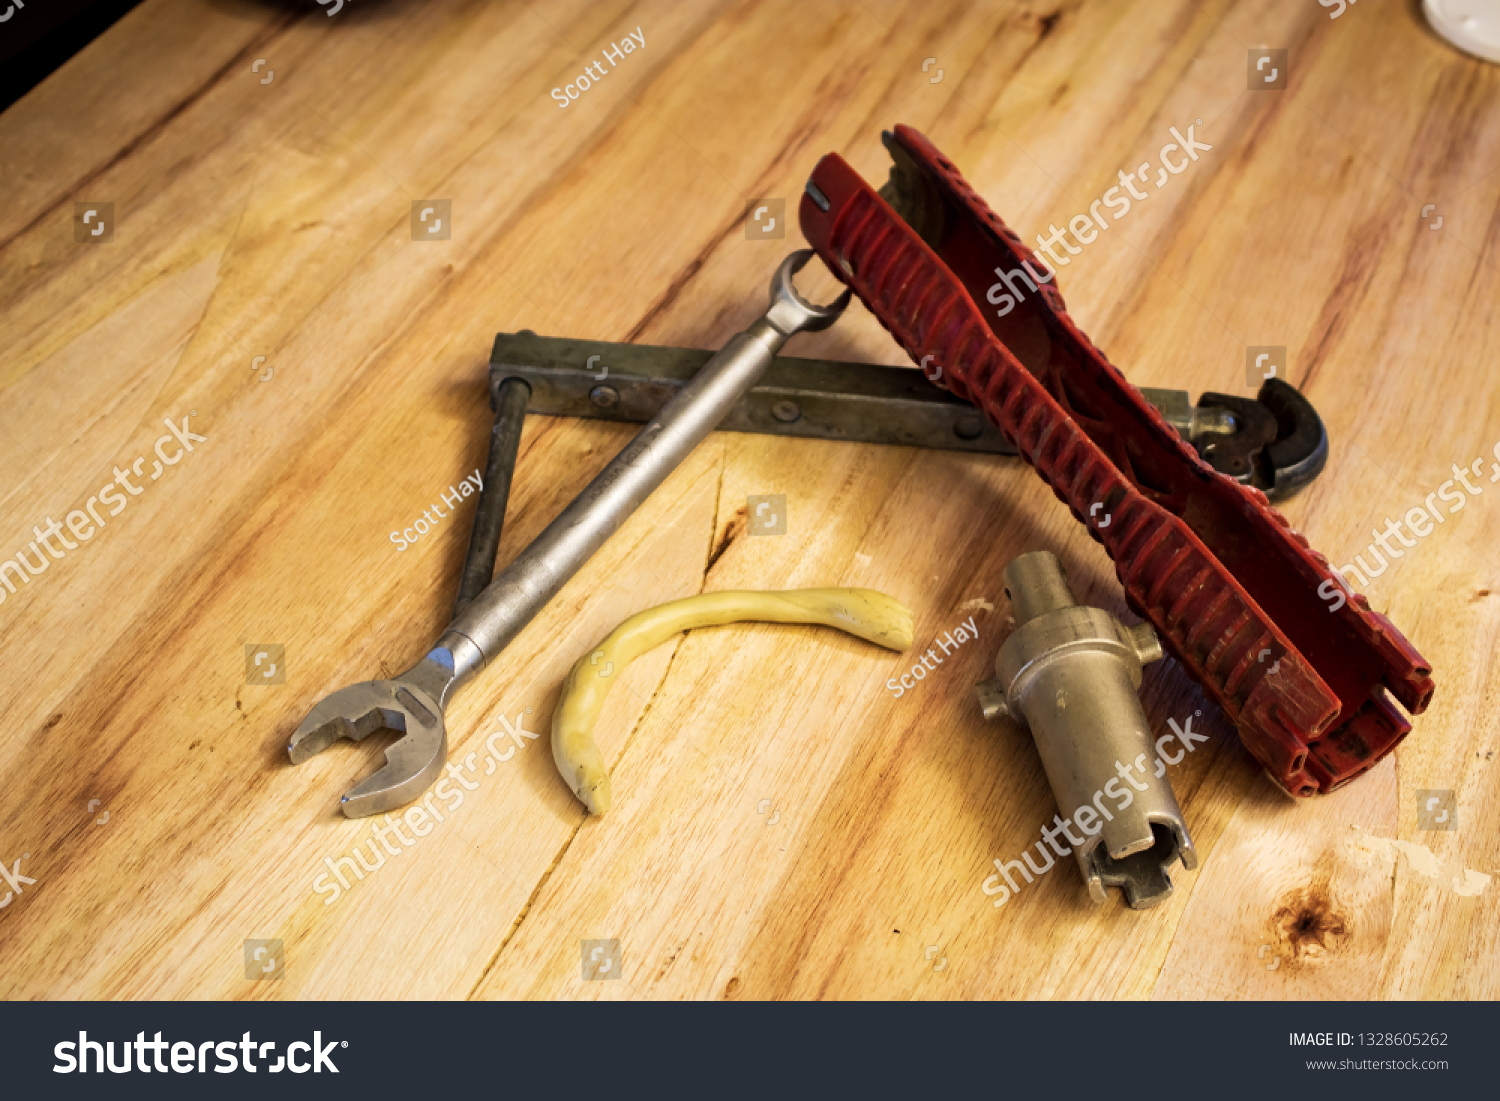 Plumbing Hand Tools Laid Out On Stock Photo Edit Now 1328605262